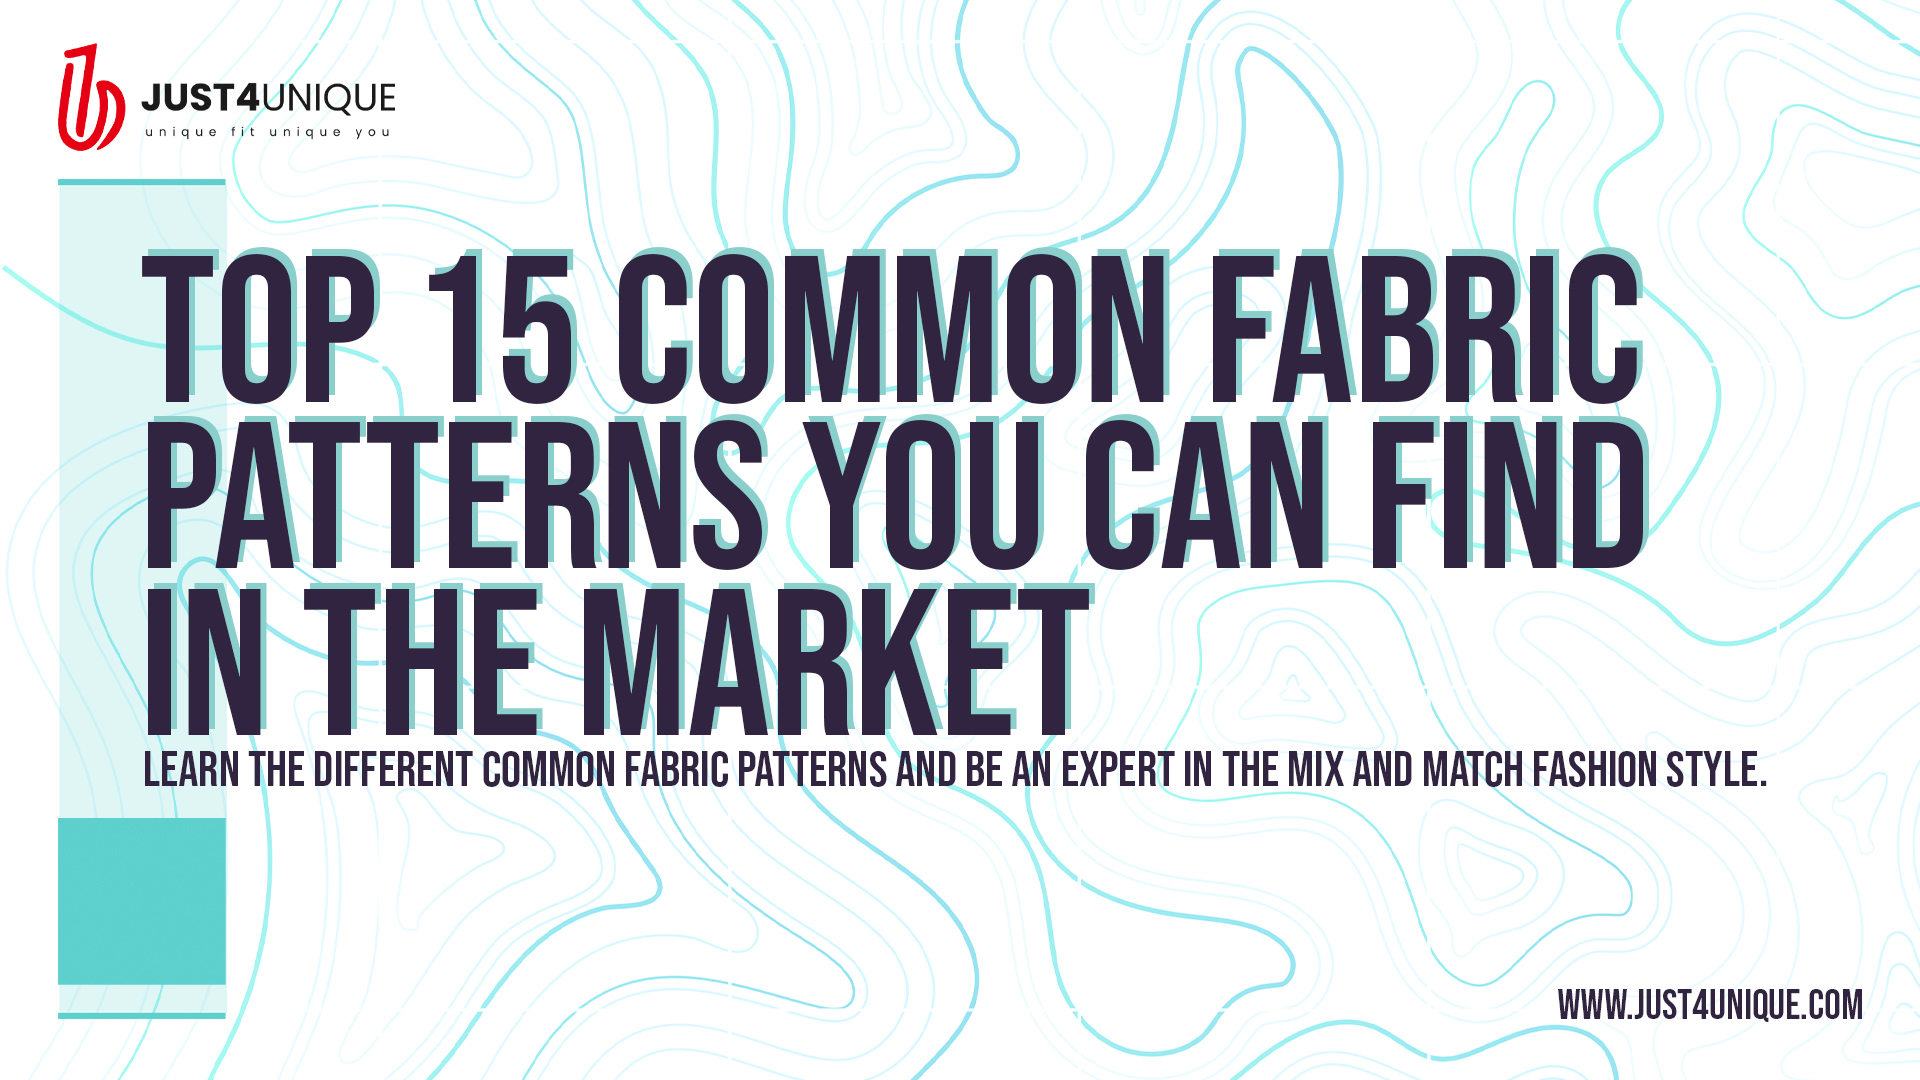 Top 15 Common Fabric Patterns You Can Find in The Market